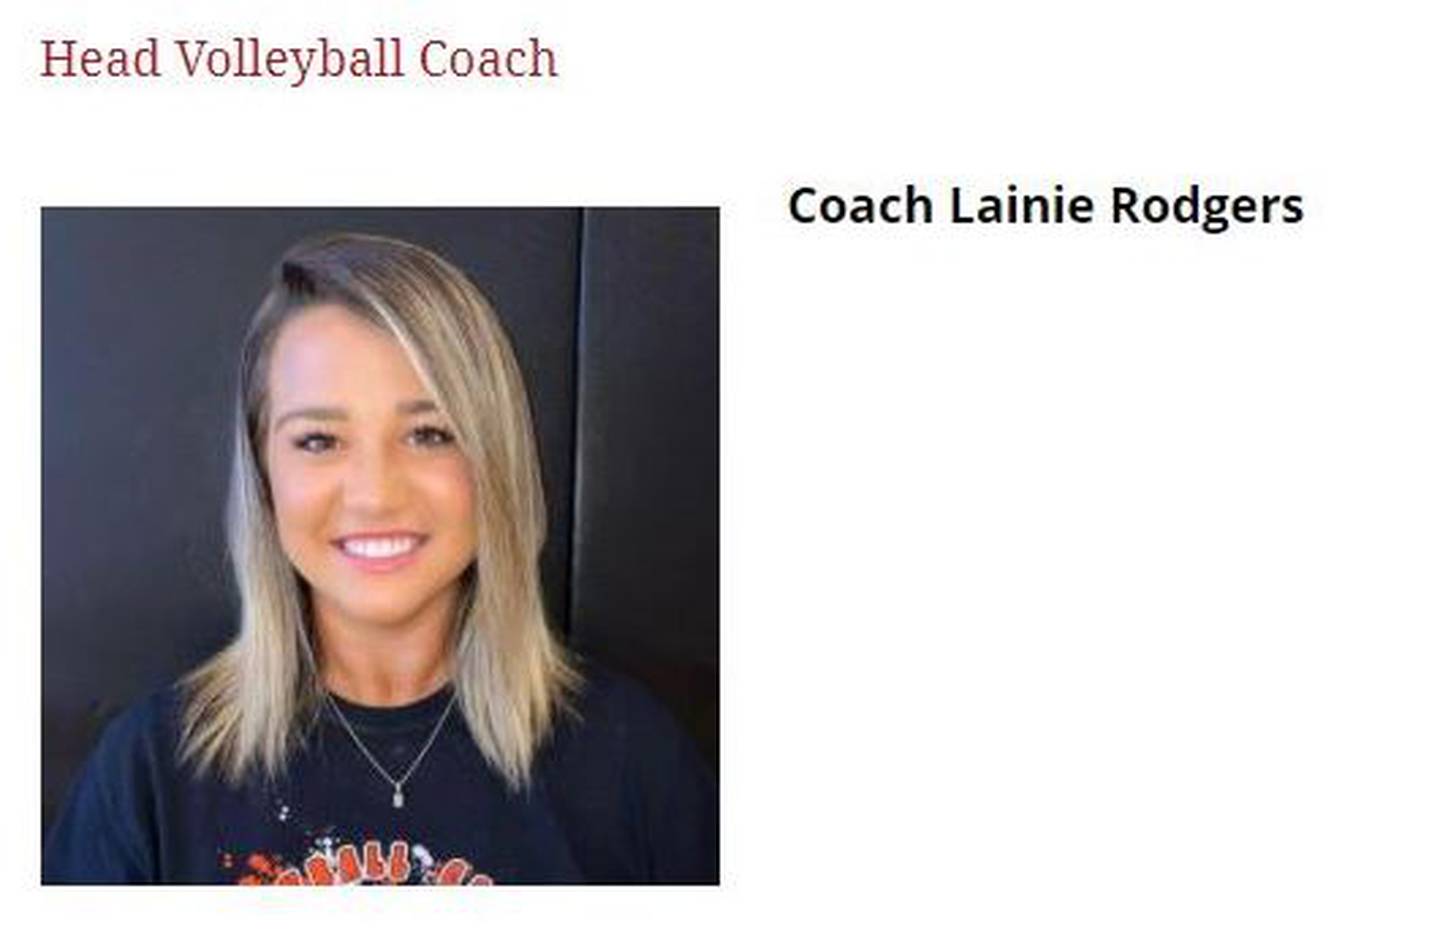 Lainie Rodgers is listed as the Head Volleyball Coach on Bradford High School's website.